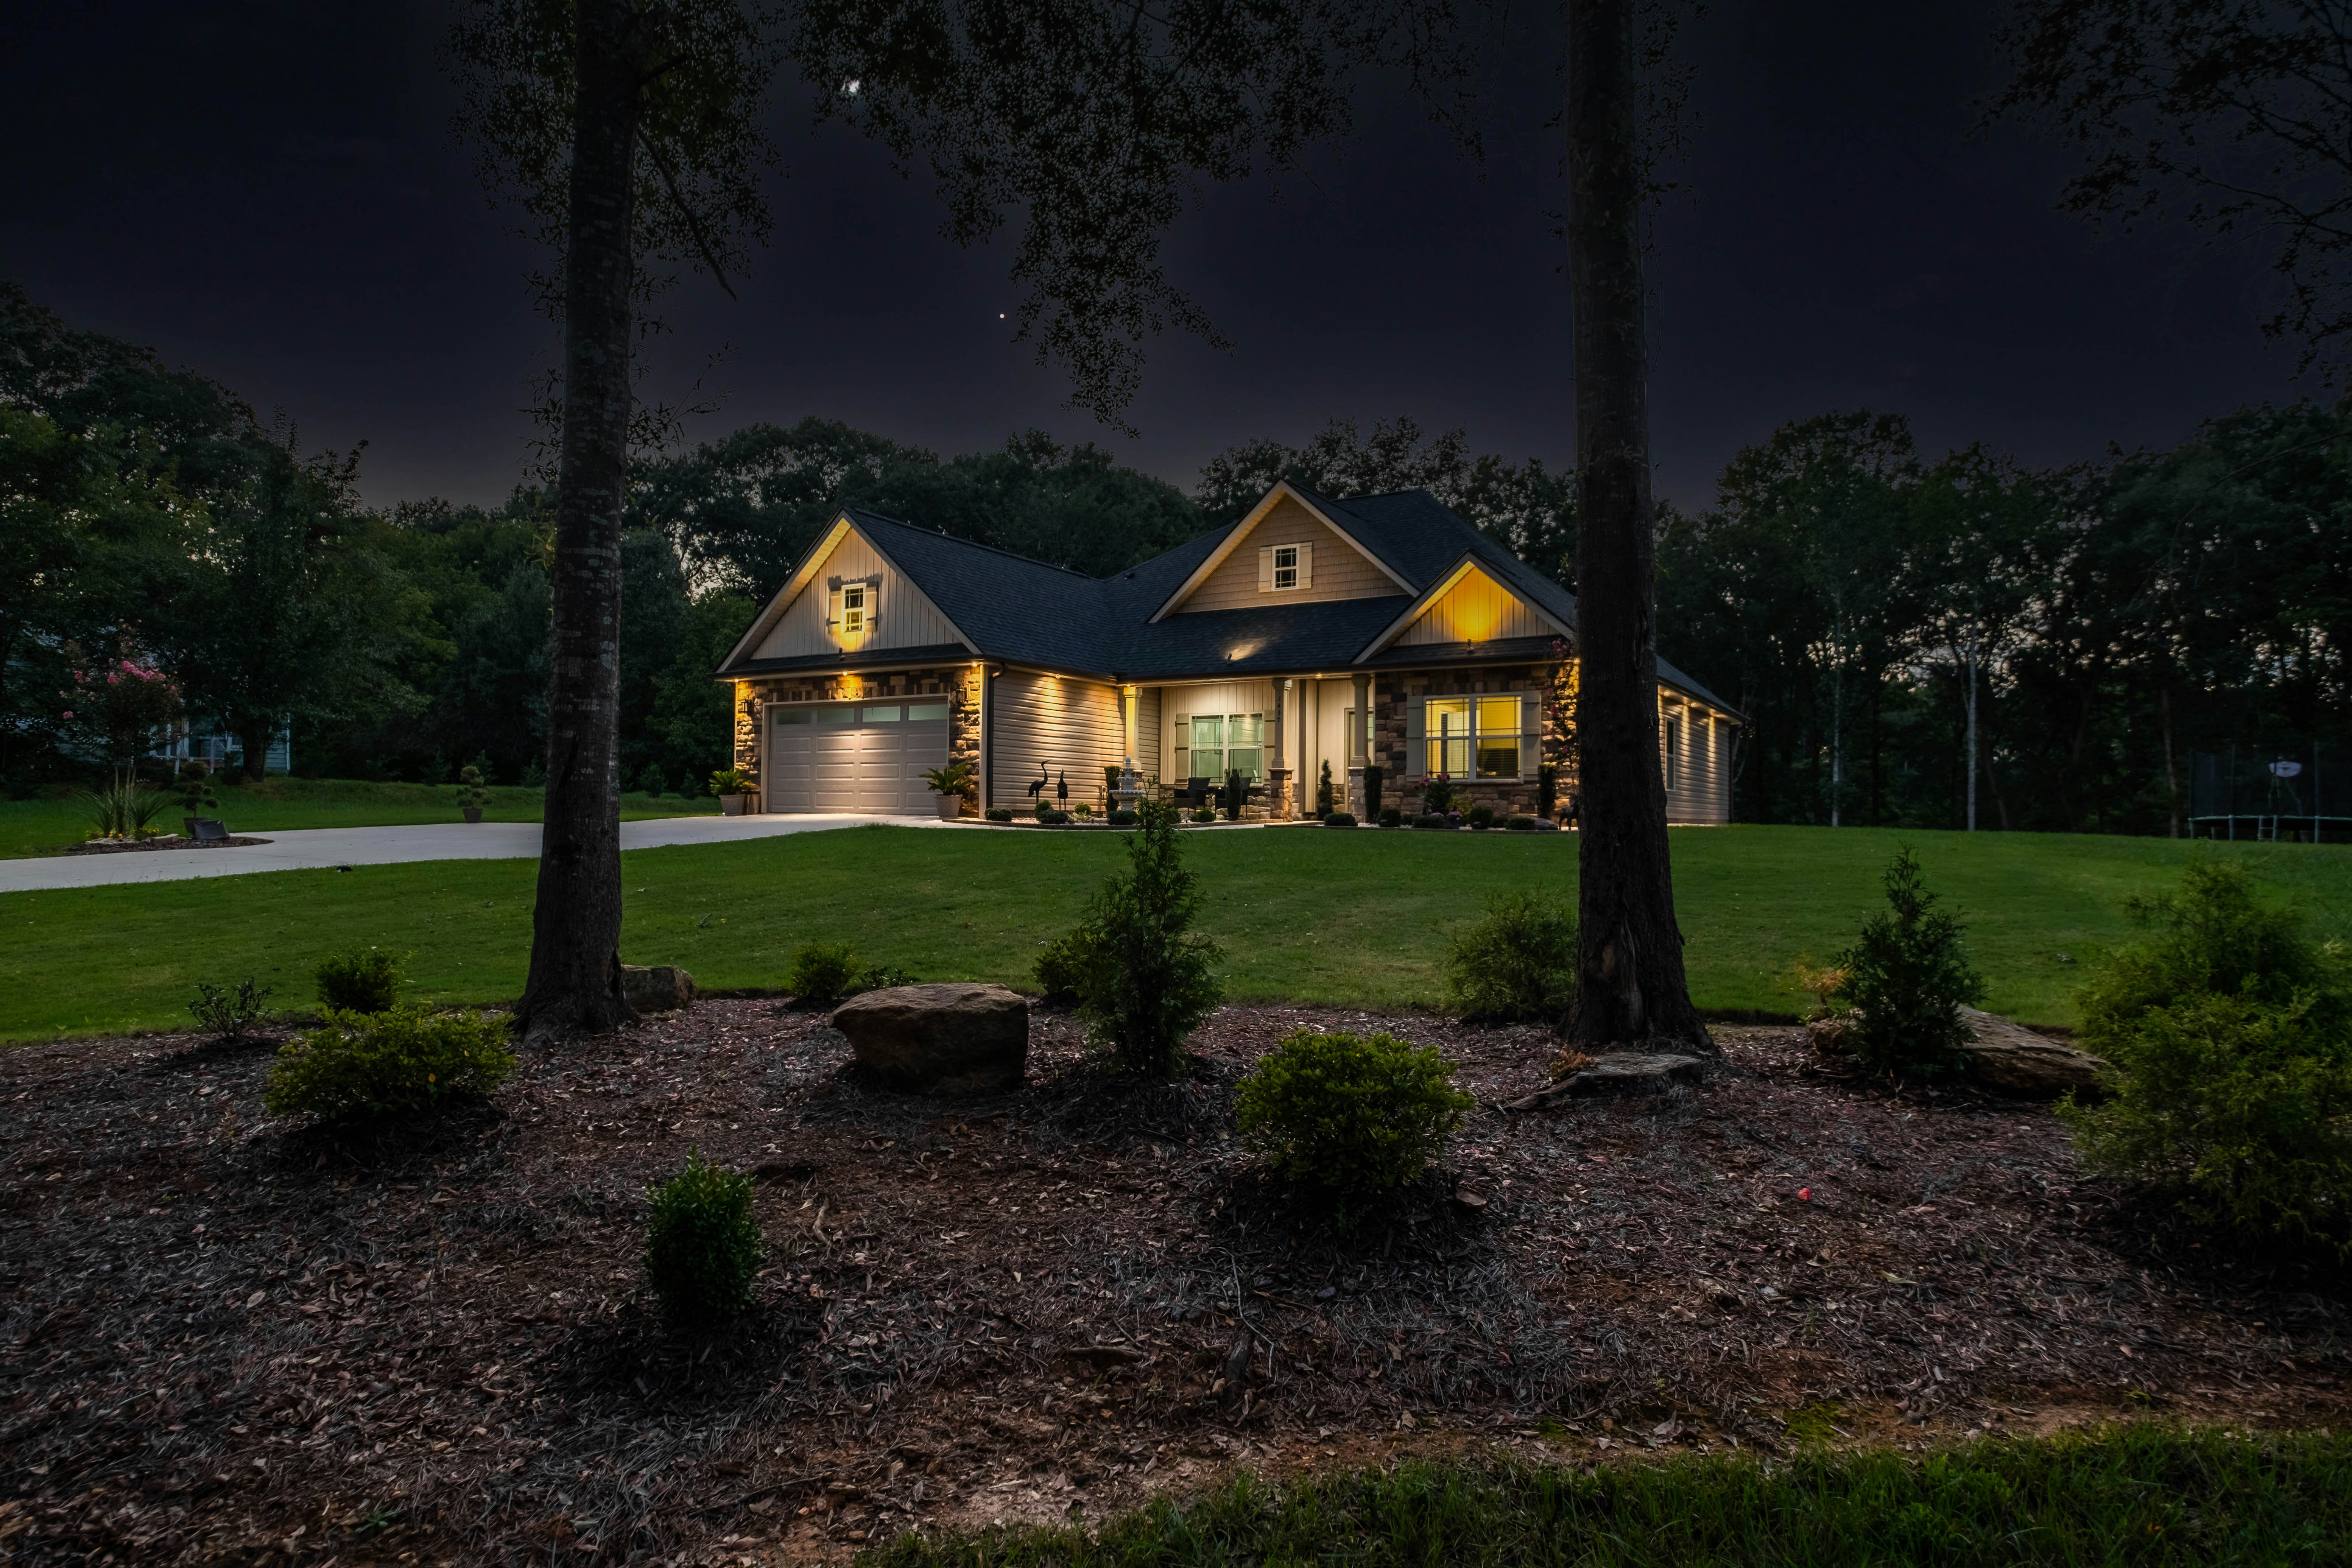 brown wooden house surrounded by trees during nighttime